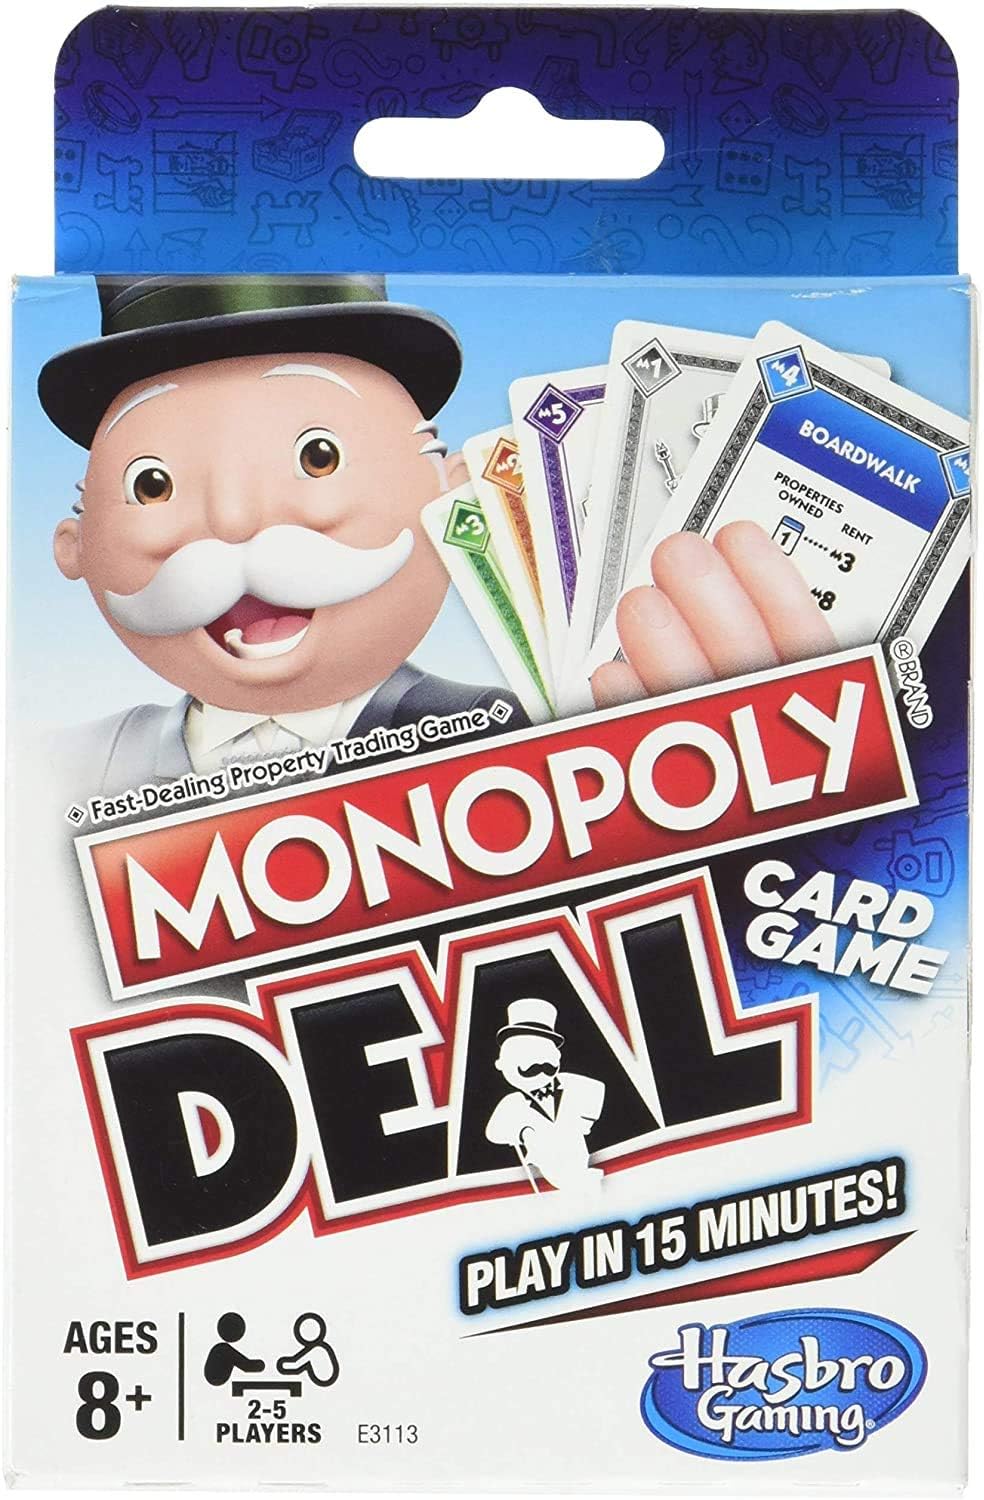 Monopoly Deal, card game